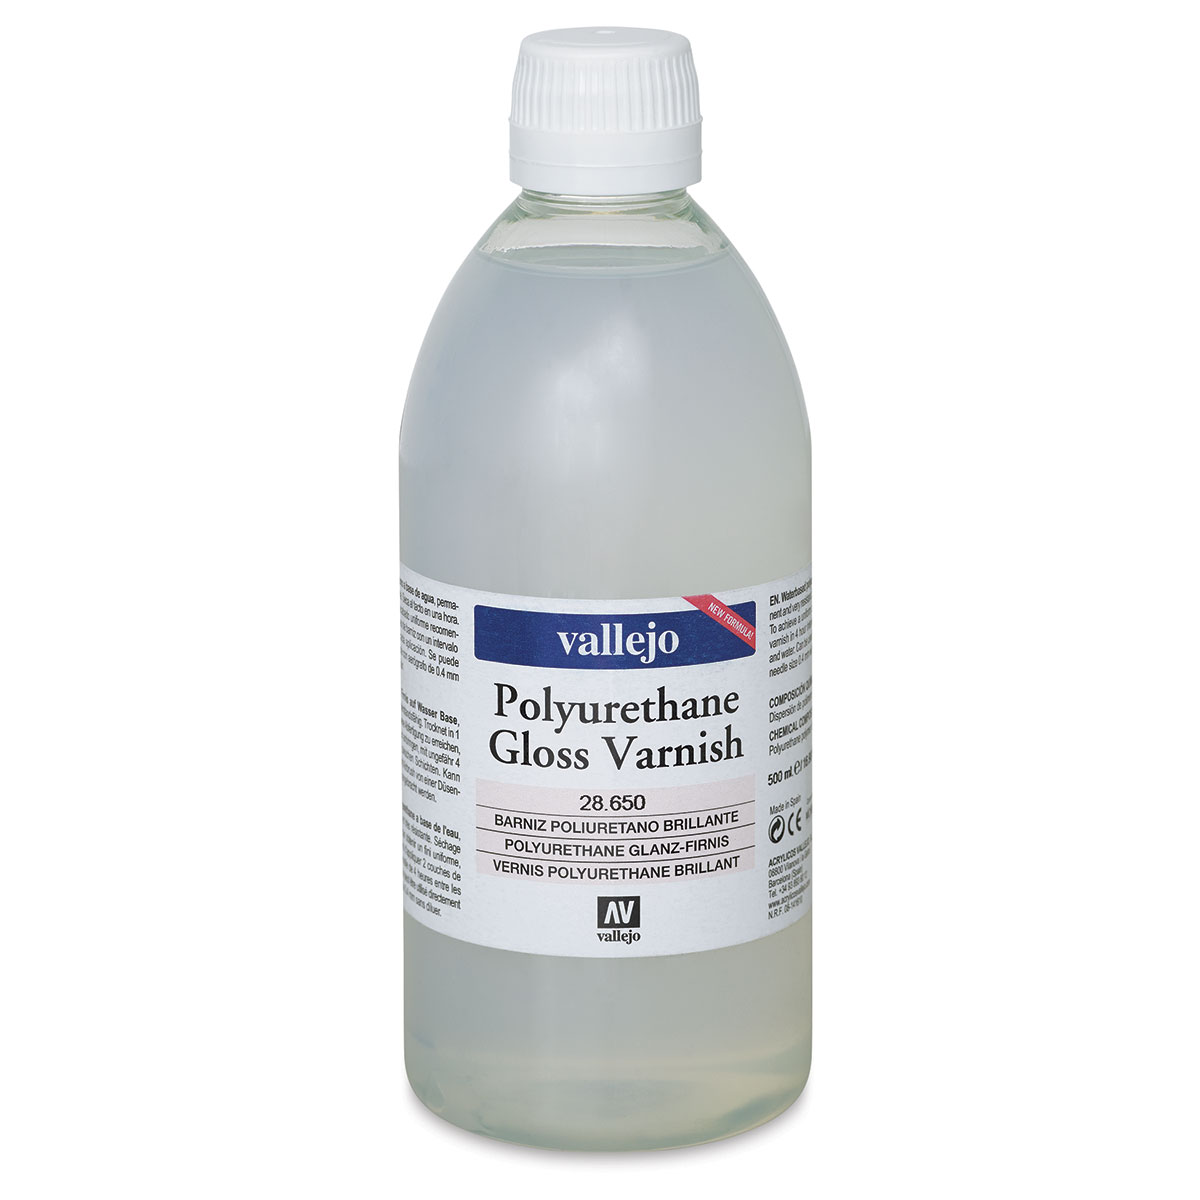 Vallejo gloss varnishes: what are the differences between each of